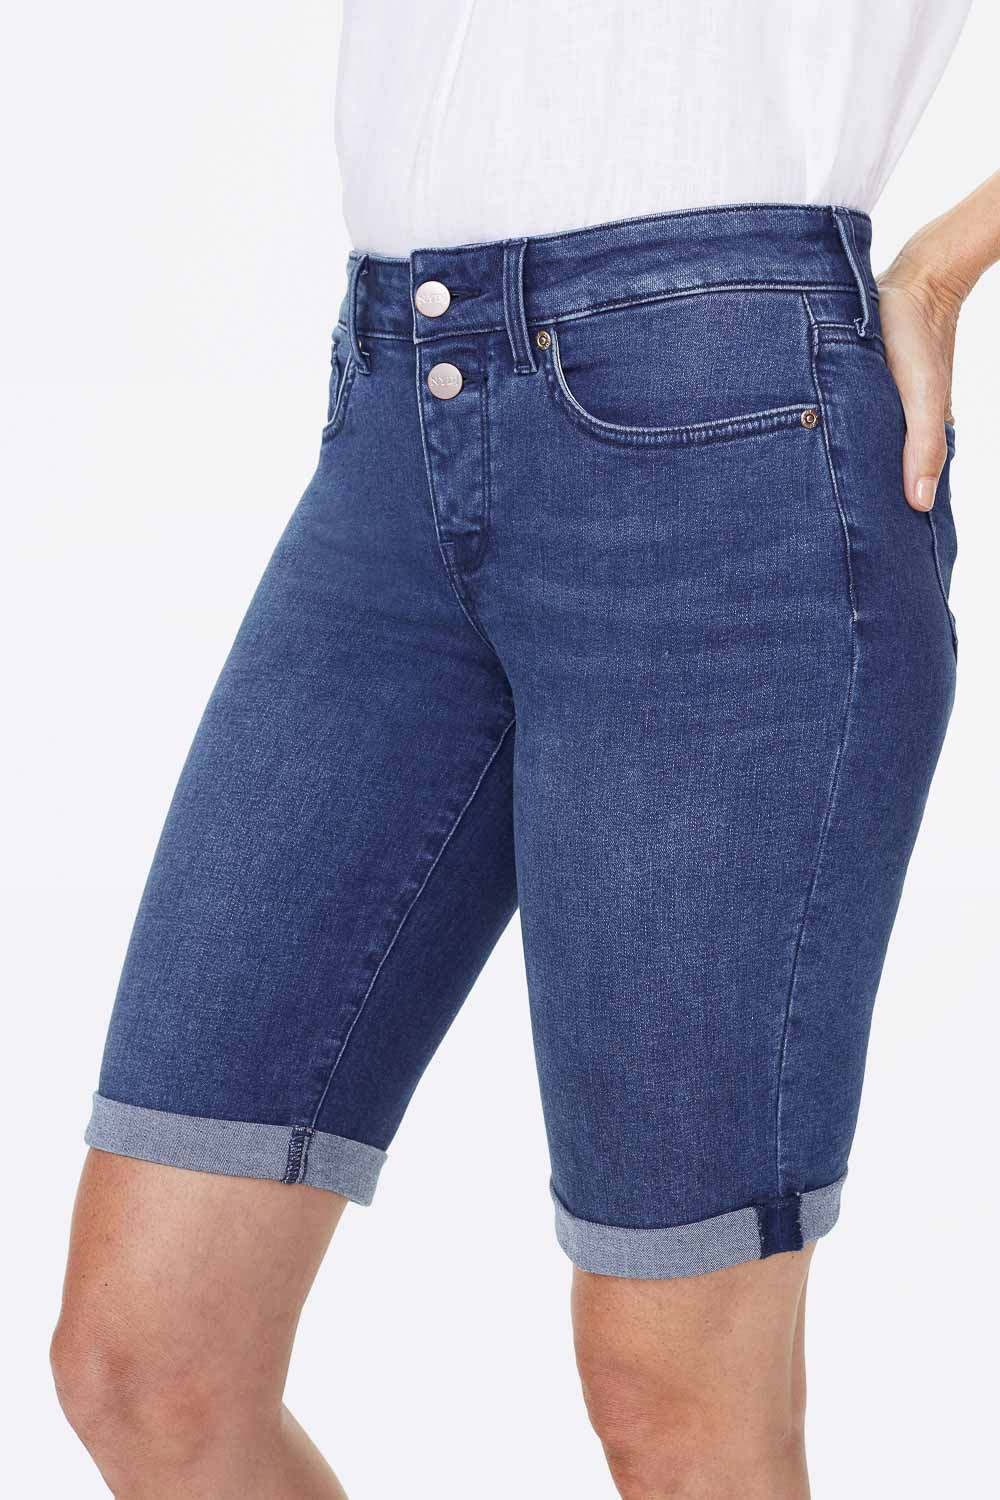 NYDJ Briella 11 Inch Denim Shorts With Double-Button Waistband And Roll Cuffs - Nevin